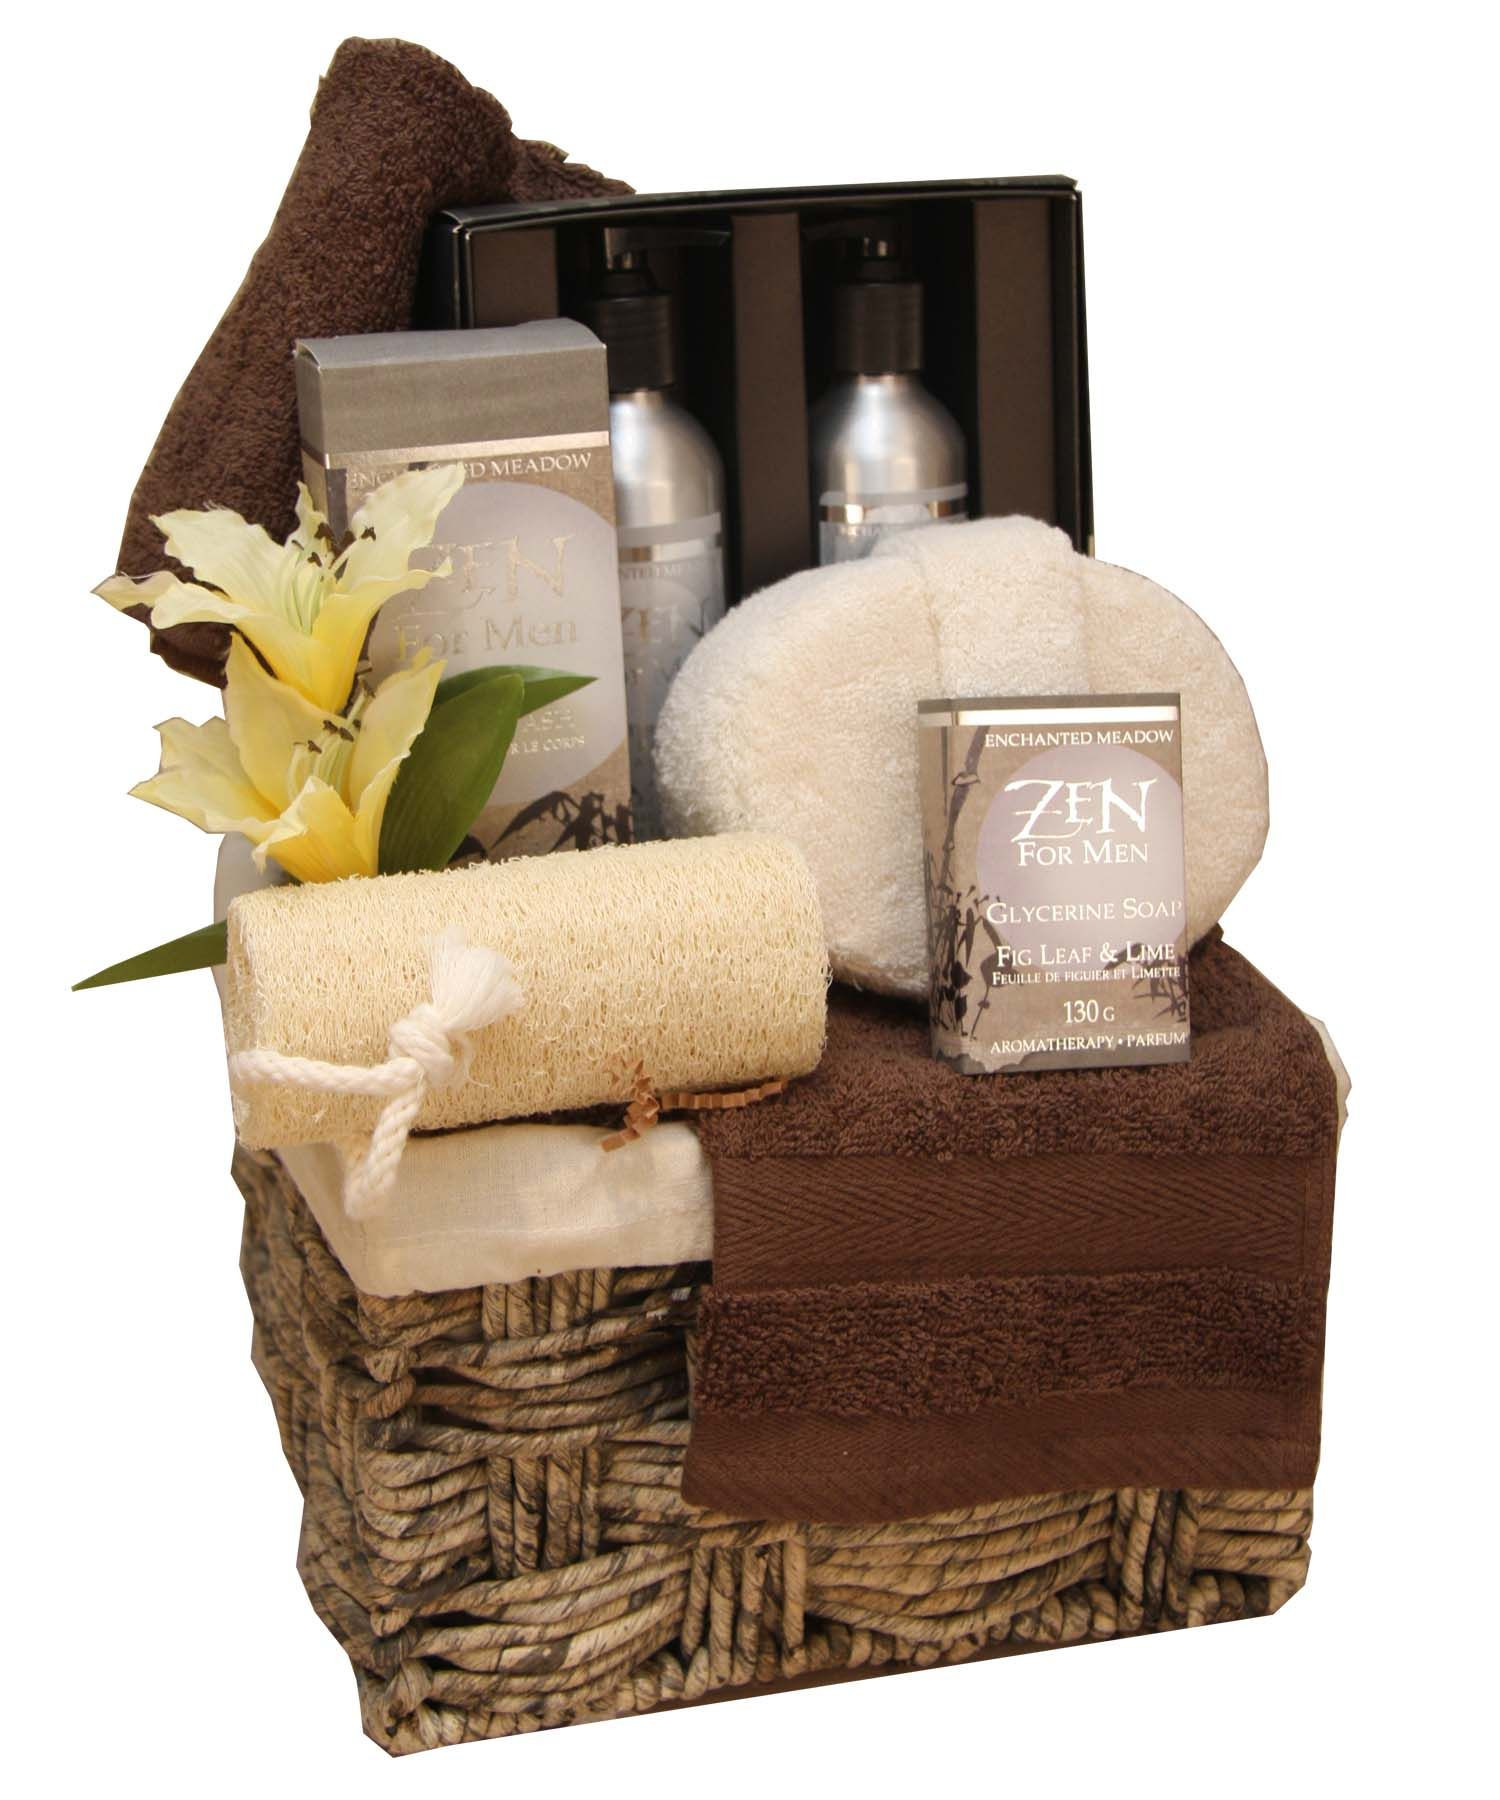 Spa Basket Gift Ideas
 Manly Spa Gift Basket 26lime manly ts